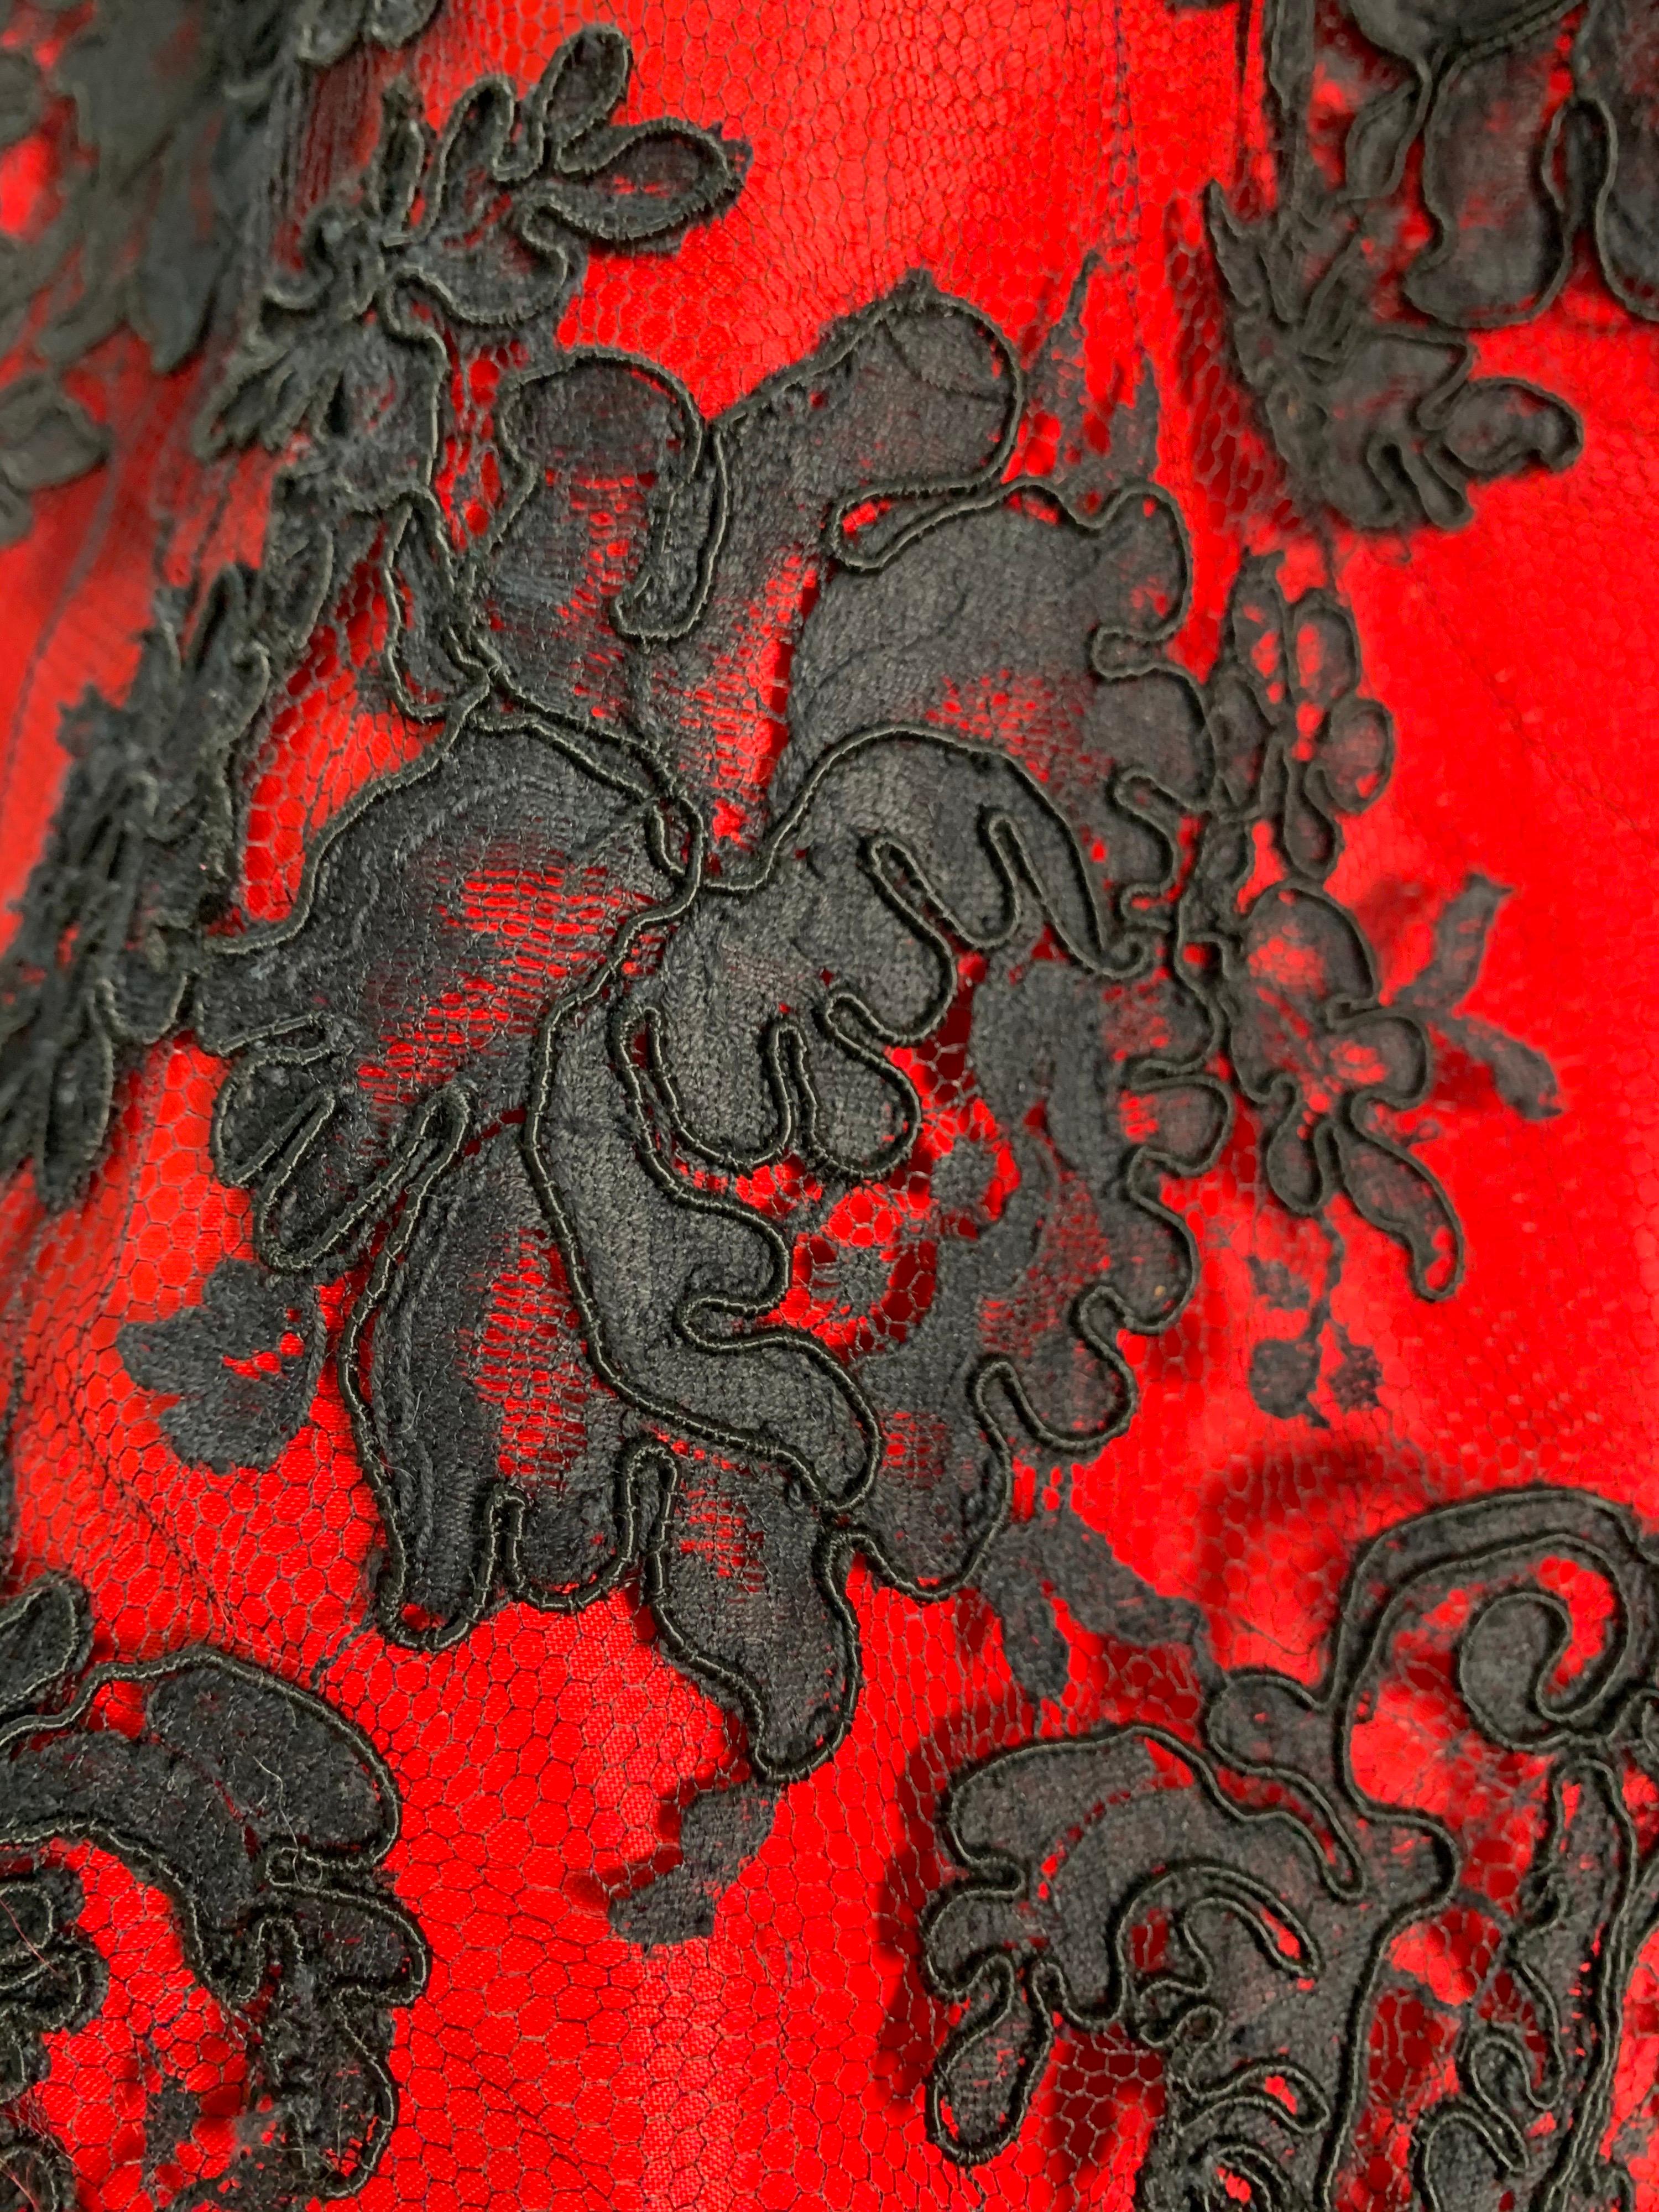 1980 Pauline Trigere Red Silk Taffeta & Black Lace Overlay Cocktail Dress  For Sale 8